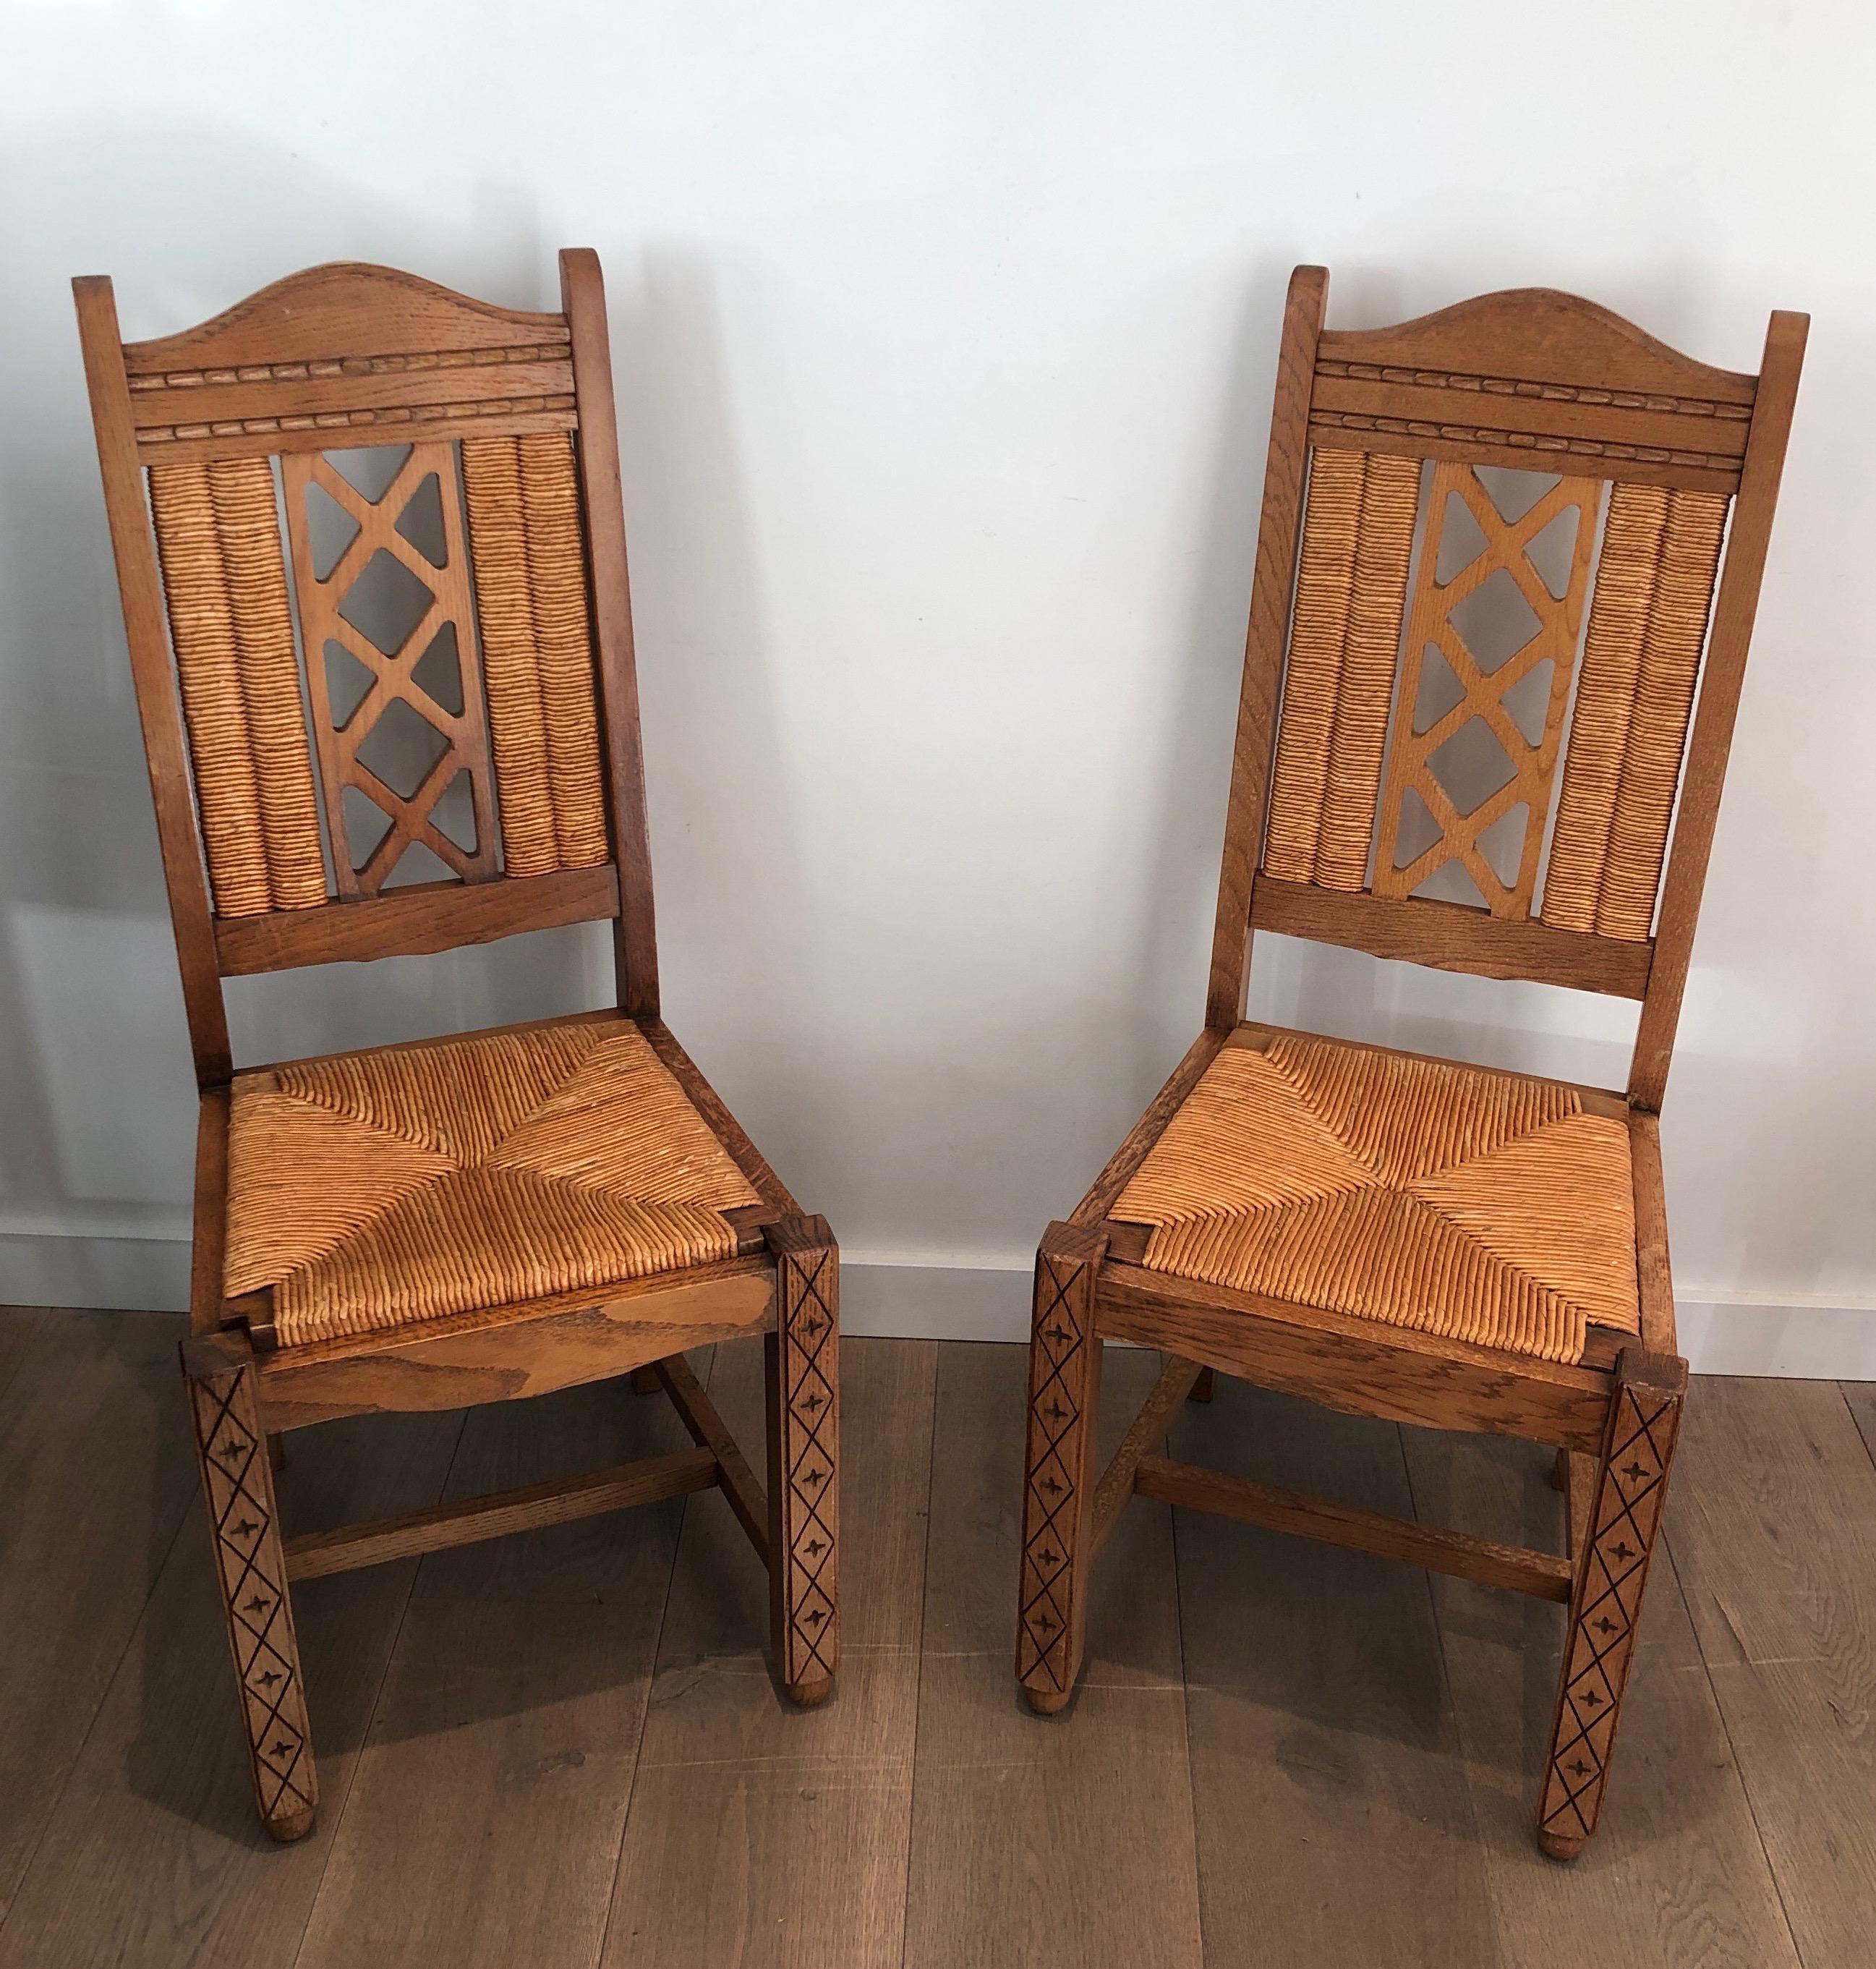 Set of 6 Brutalist Chairs Made of Ash and Straw, French Work, Circa 1950 For Sale 14